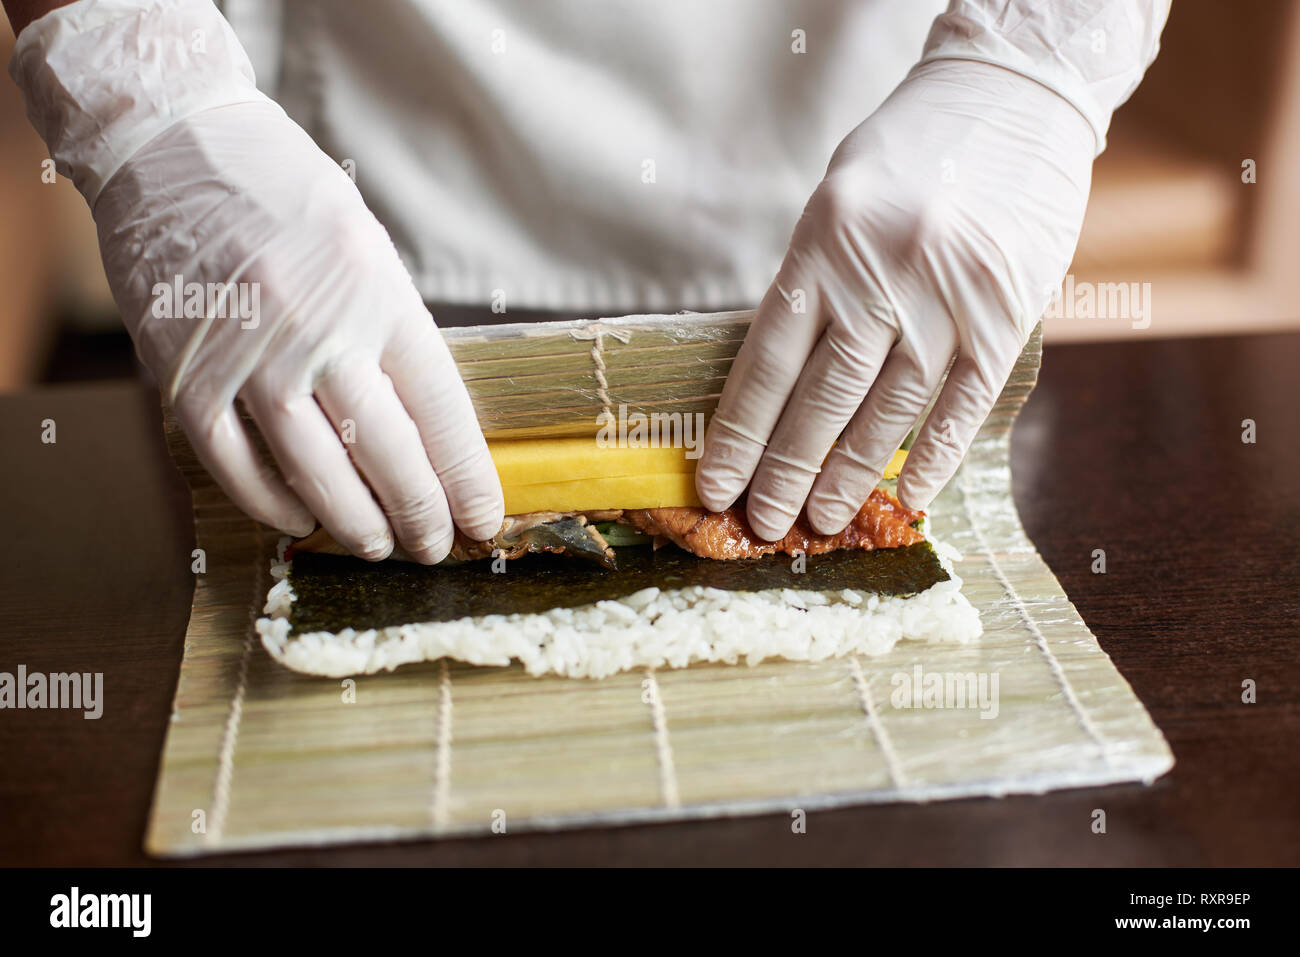 Making Rolled Sushi In A Bamboo Sushi Mat Stock Photo, Picture and